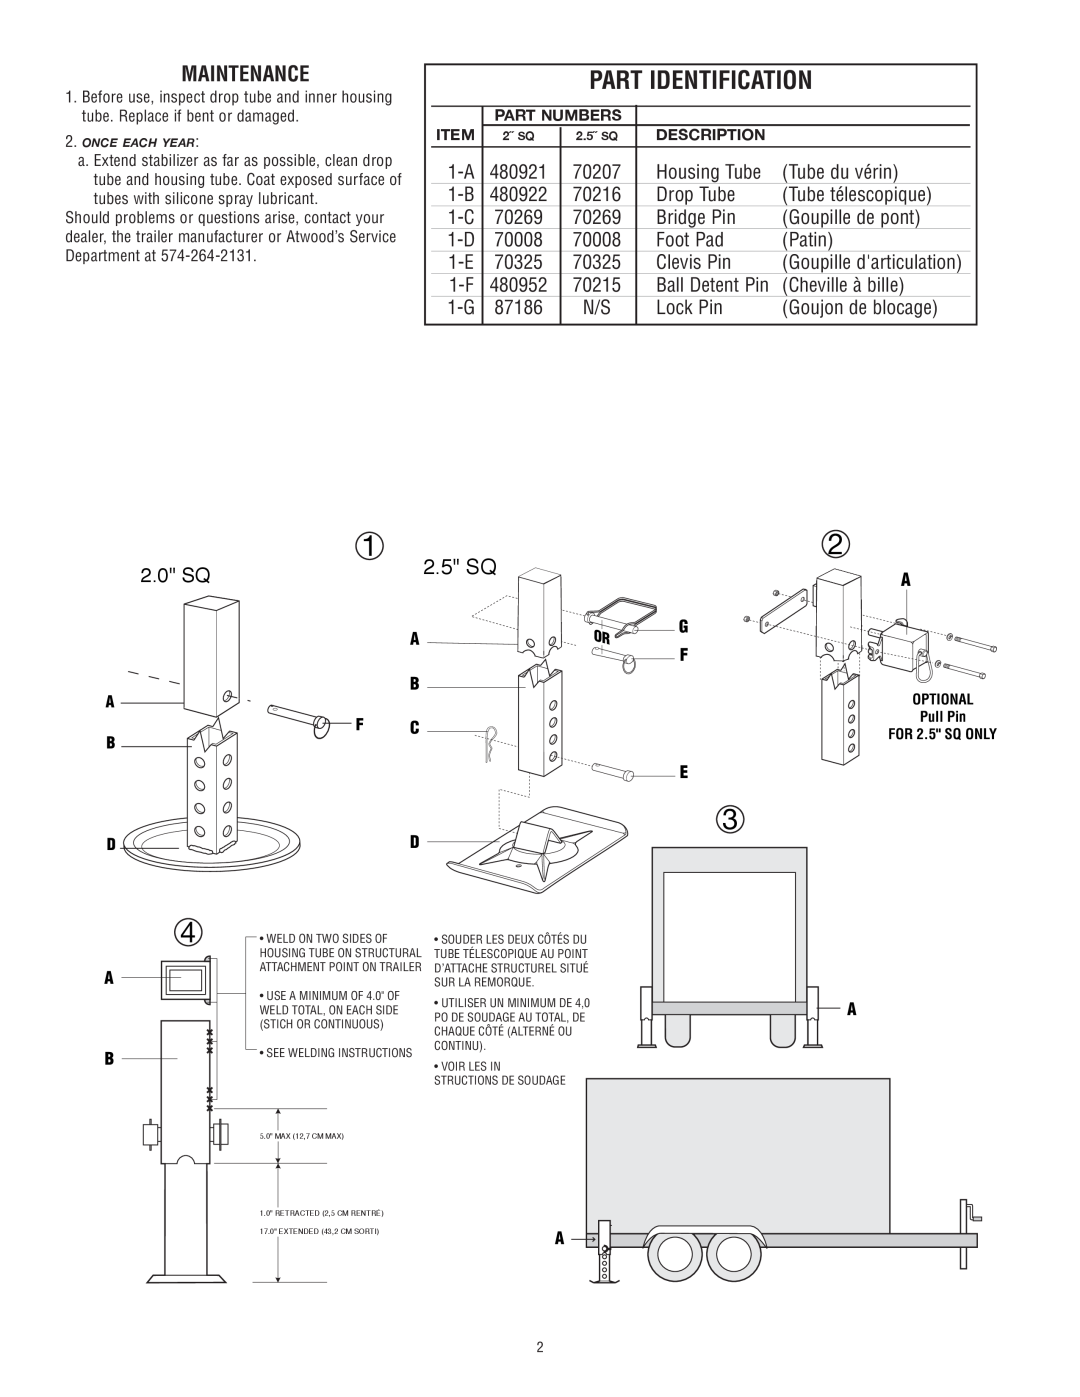 Atwood Mobile Products MPD 85810 instruction manual Part Identification, Maintenance, 2.5 SQ 